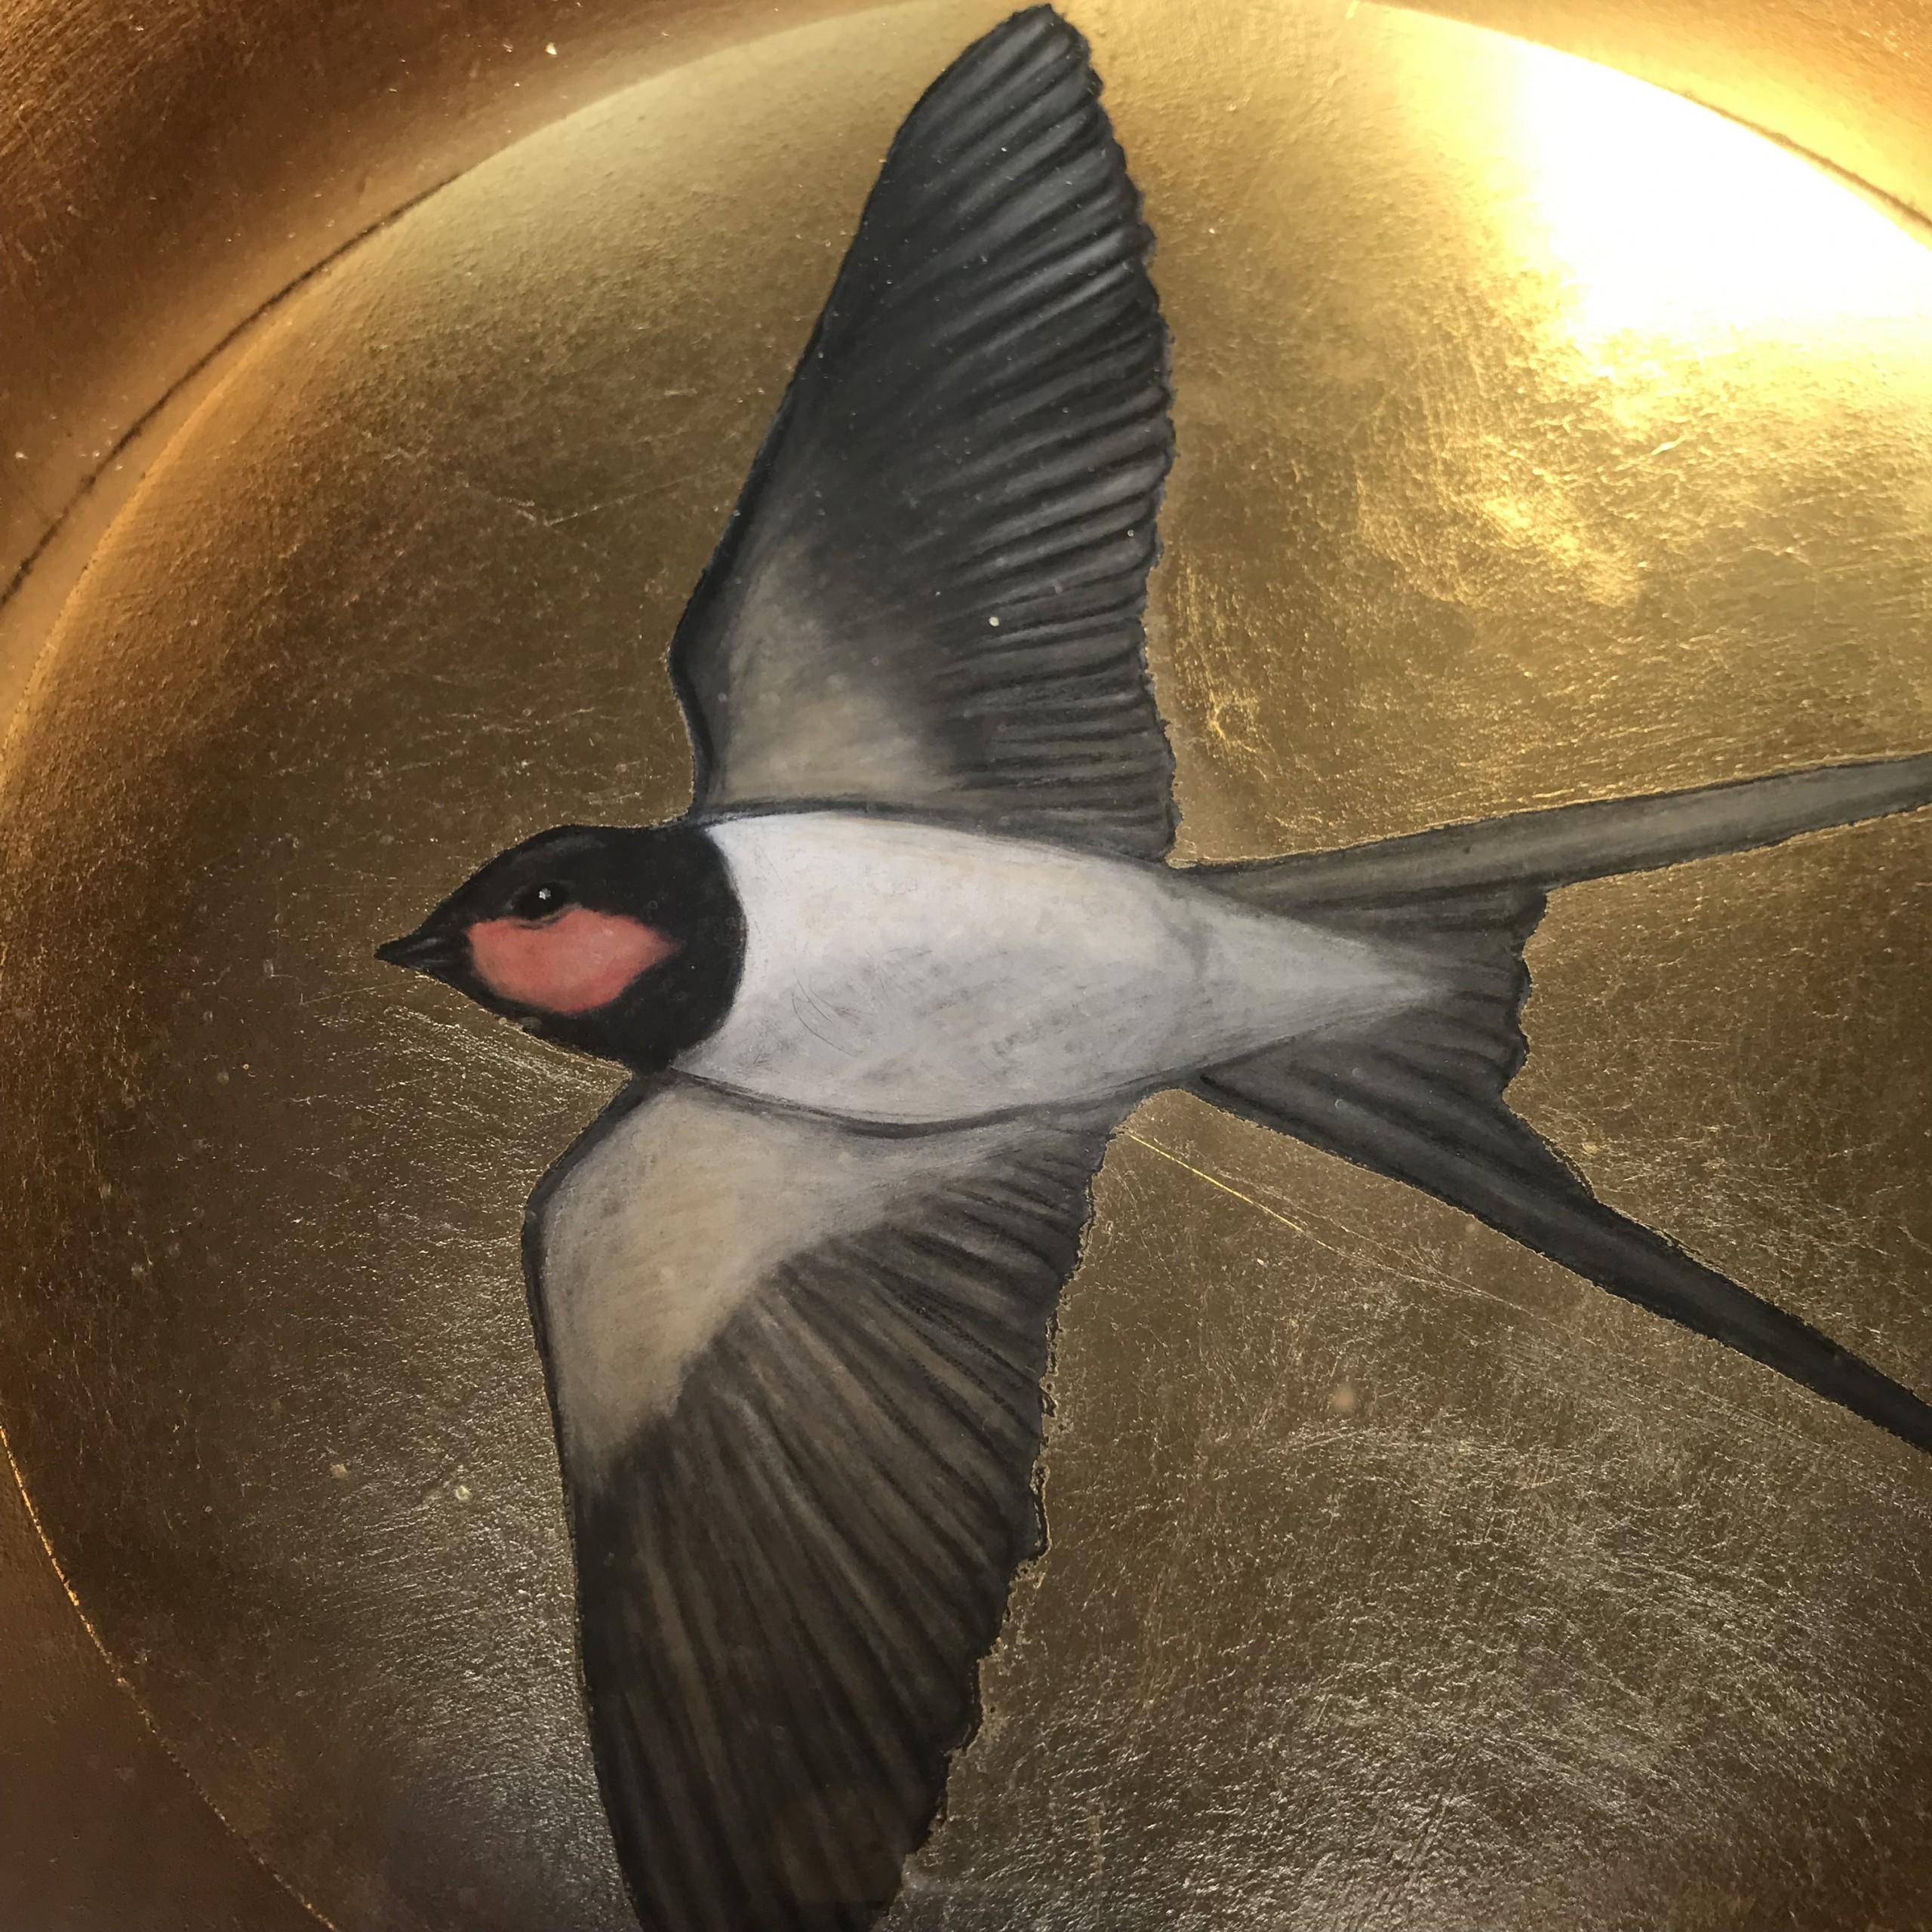 Sally-Ann Johns’ striking work often depicts everyday birds and animals, sometimes portraits, displayed in a unique and exciting way. Set into a gold lined box, they conjure images of ancient religious icons tempting the viewer to witness them in a